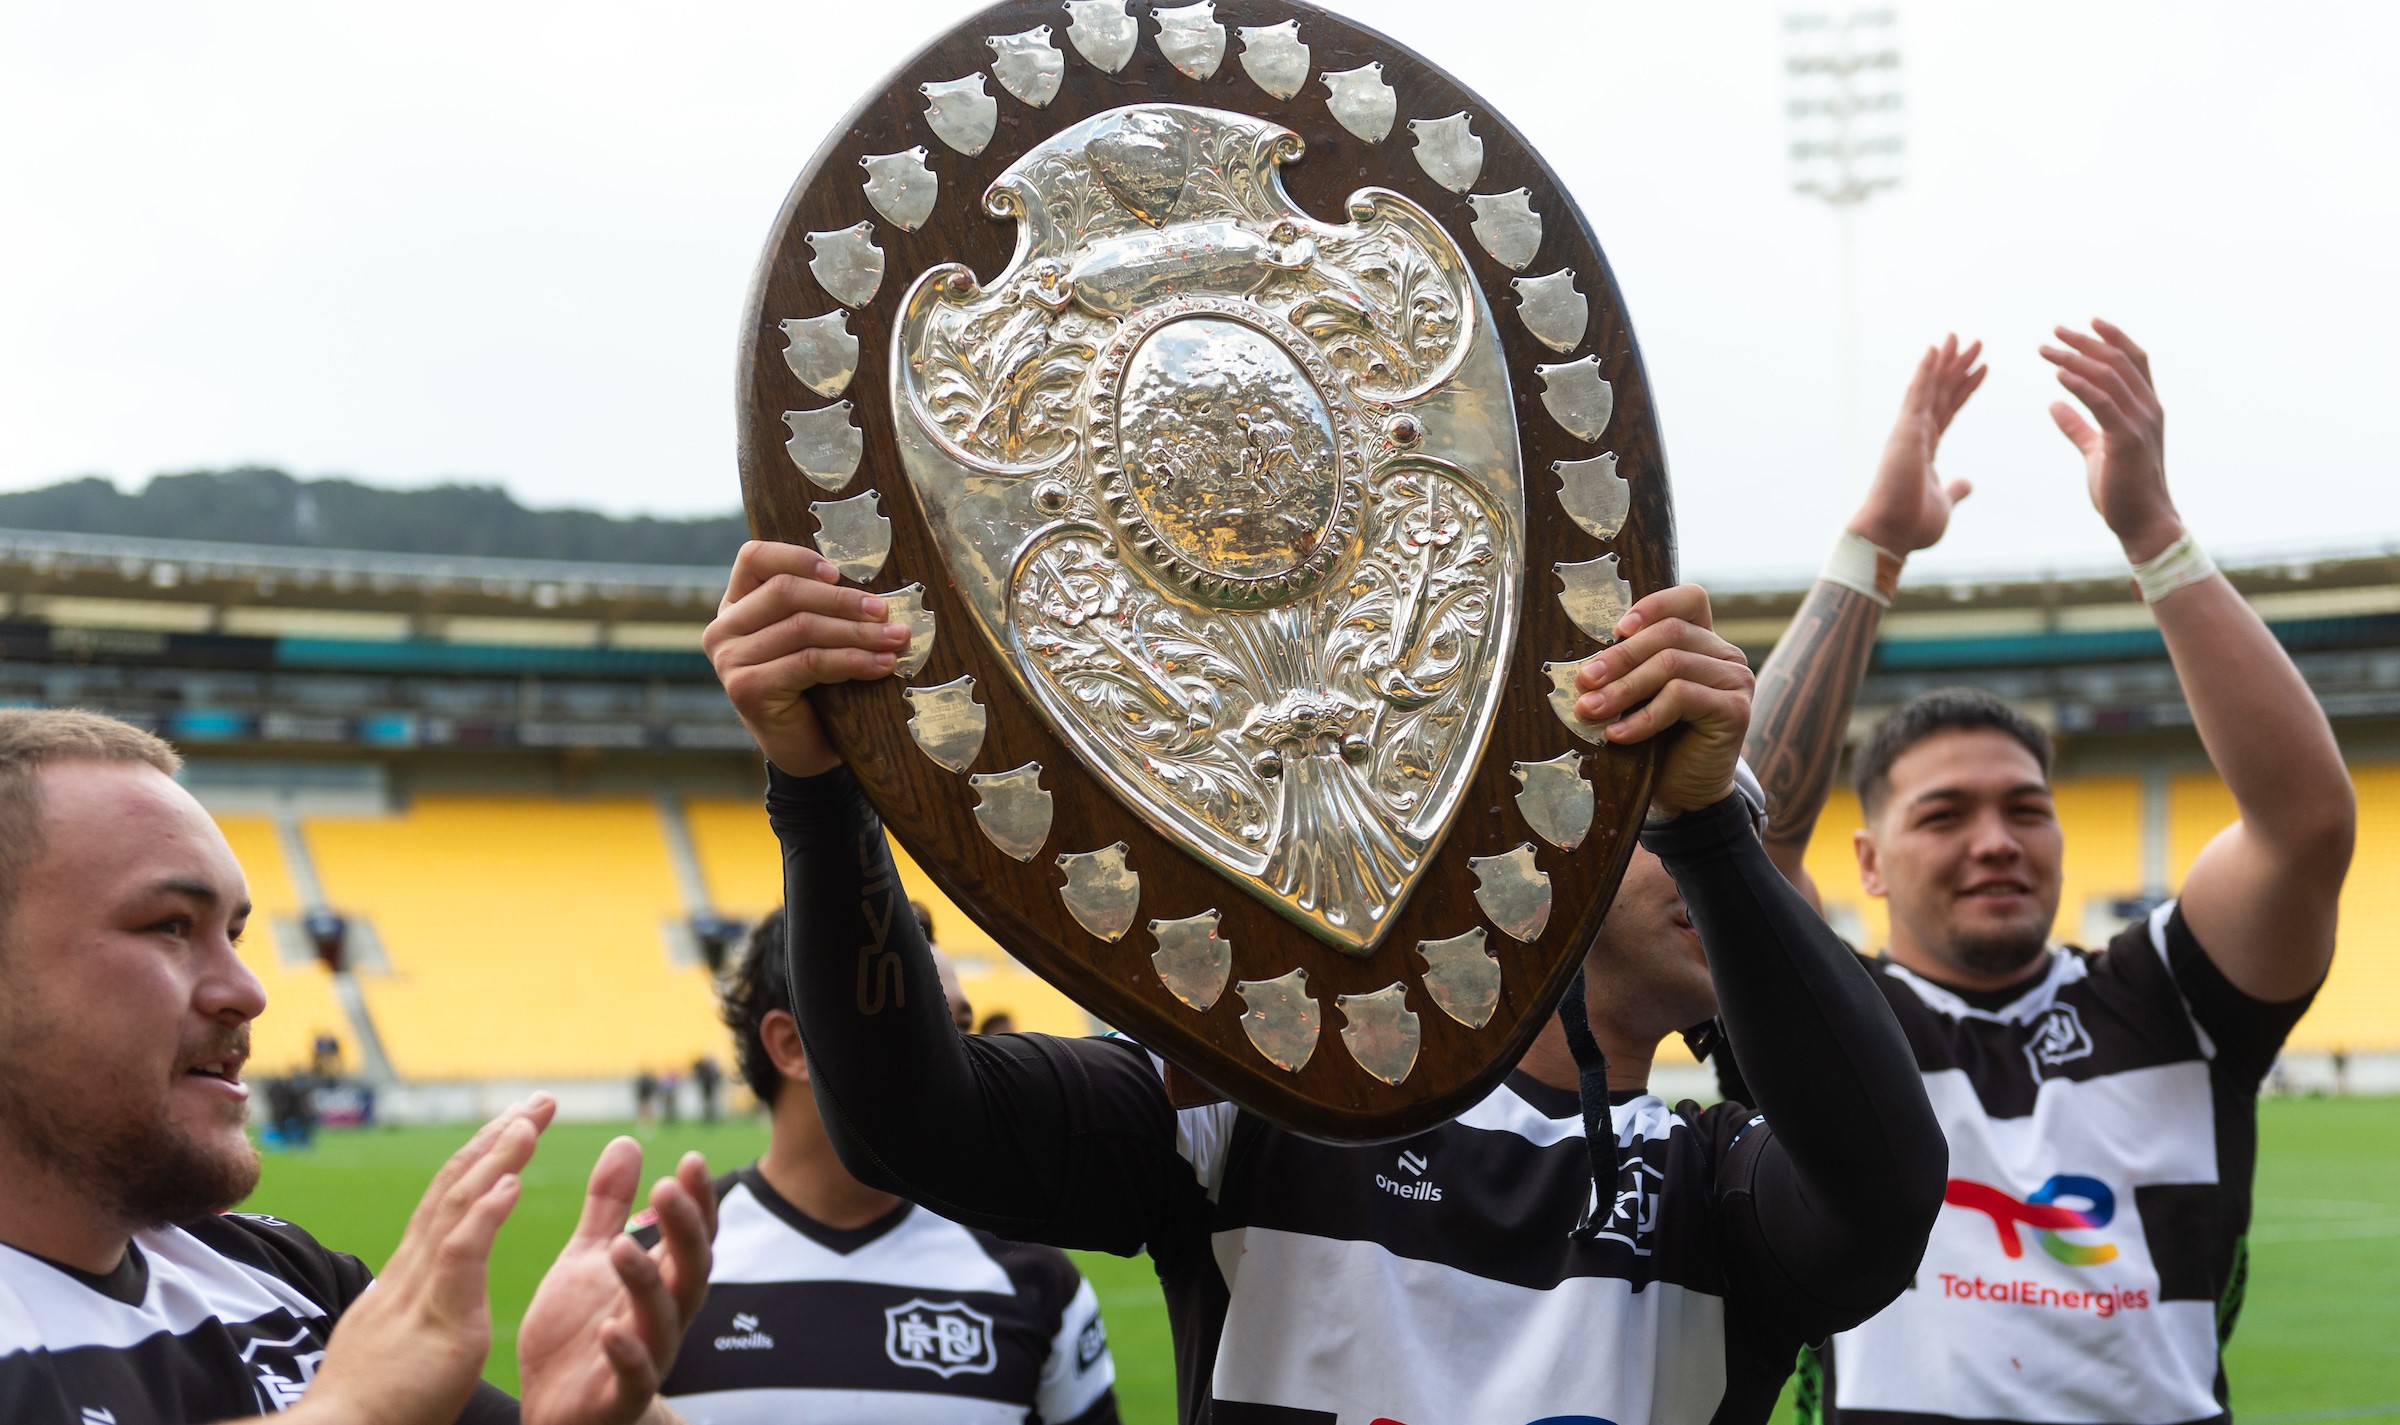 Ranfurly Shield craftsman disappointed after shield damaged